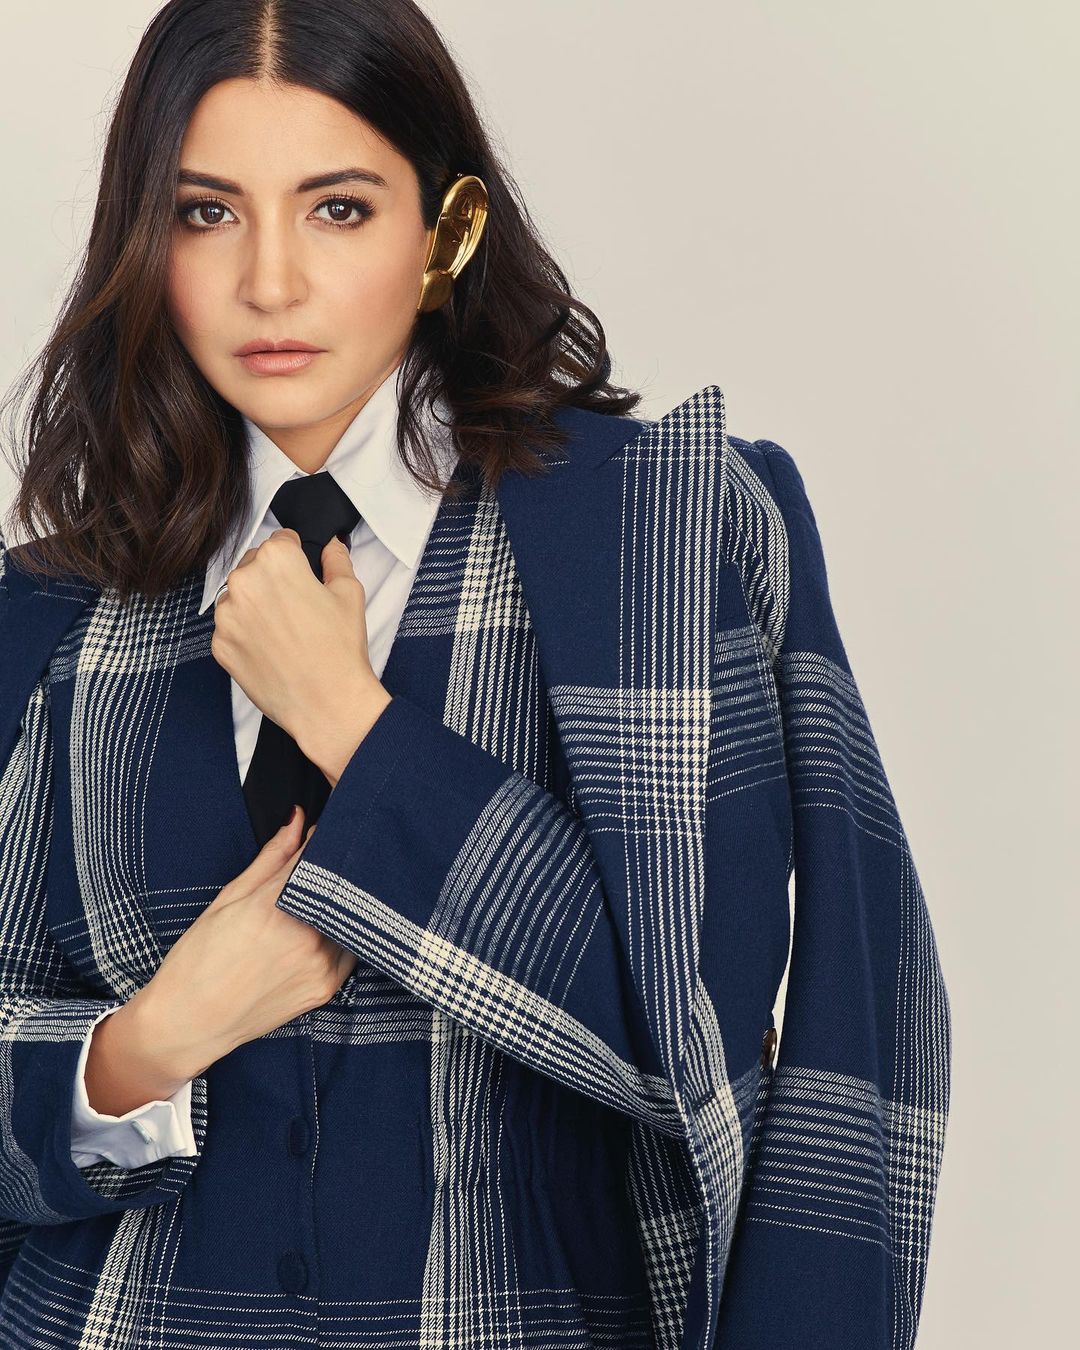 Biography of Anushka Sharma and Other life Information and 10 Facts